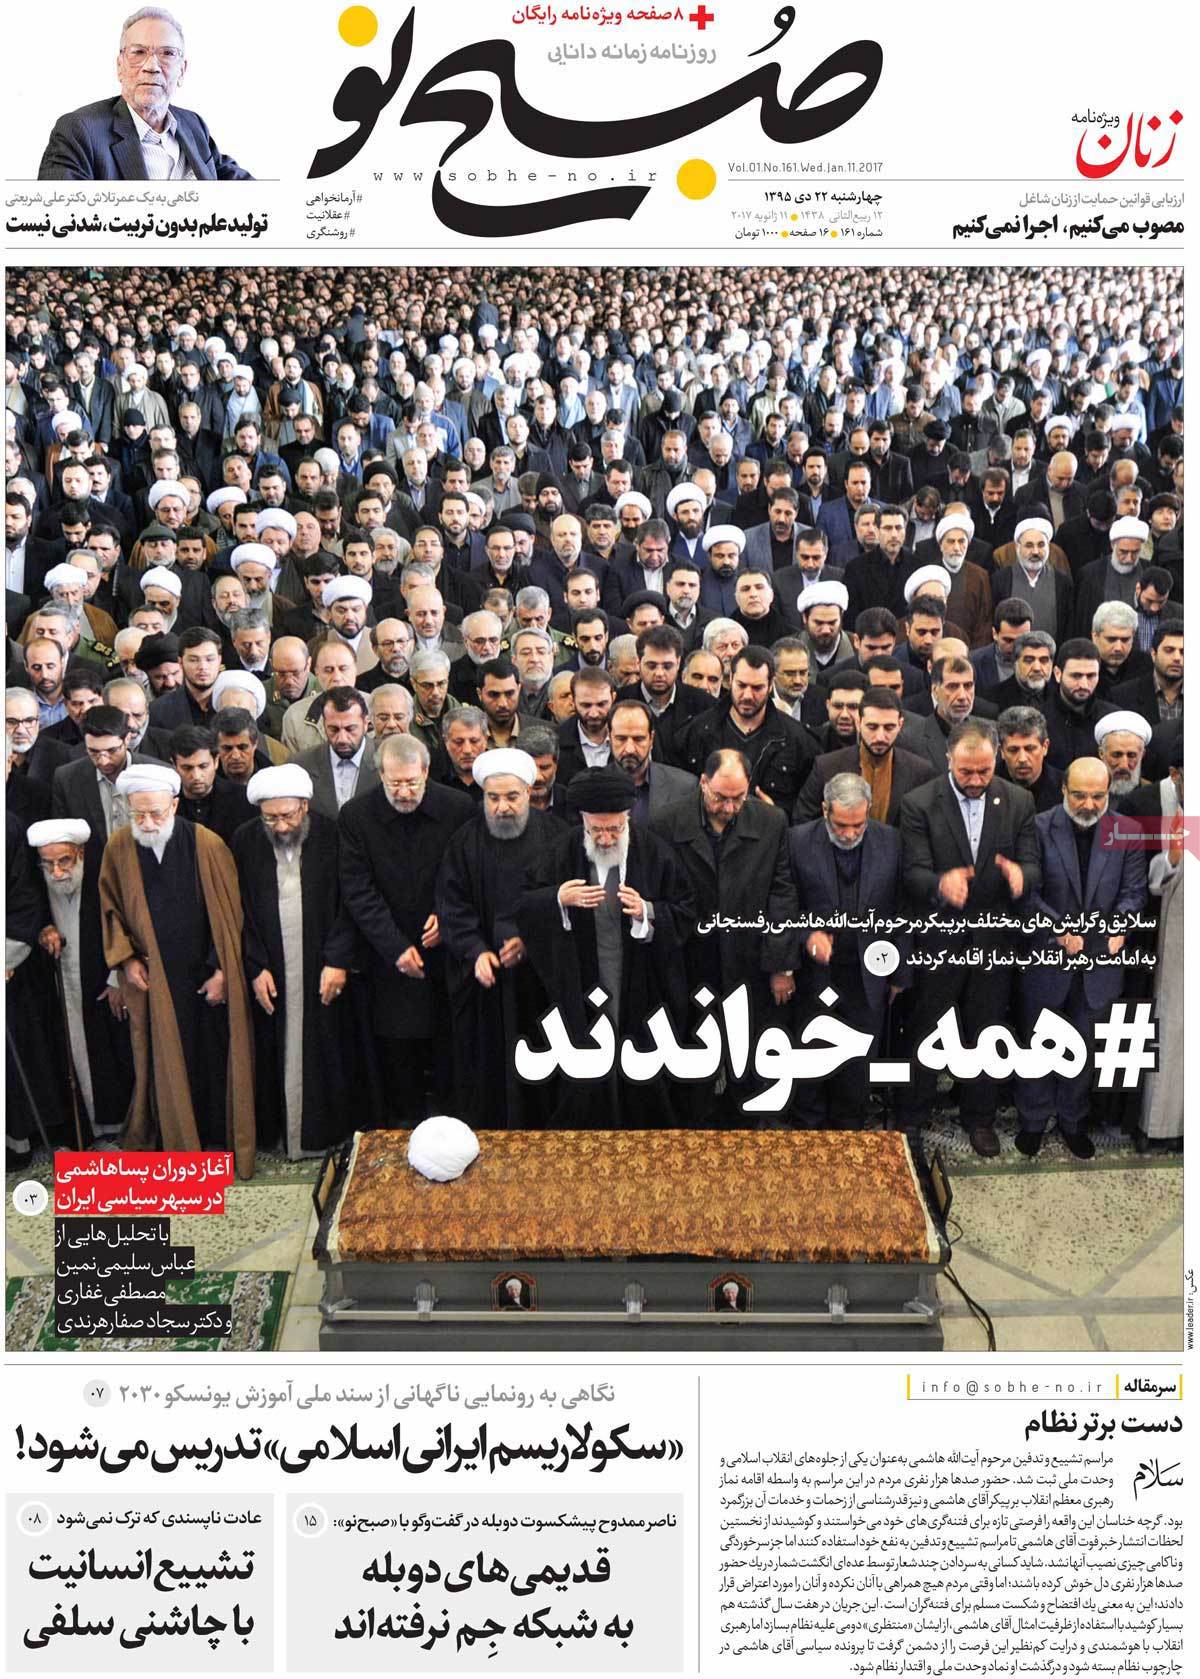 Iranian Newspapers on the Day after Ex-President Rafsanjani’s Burial